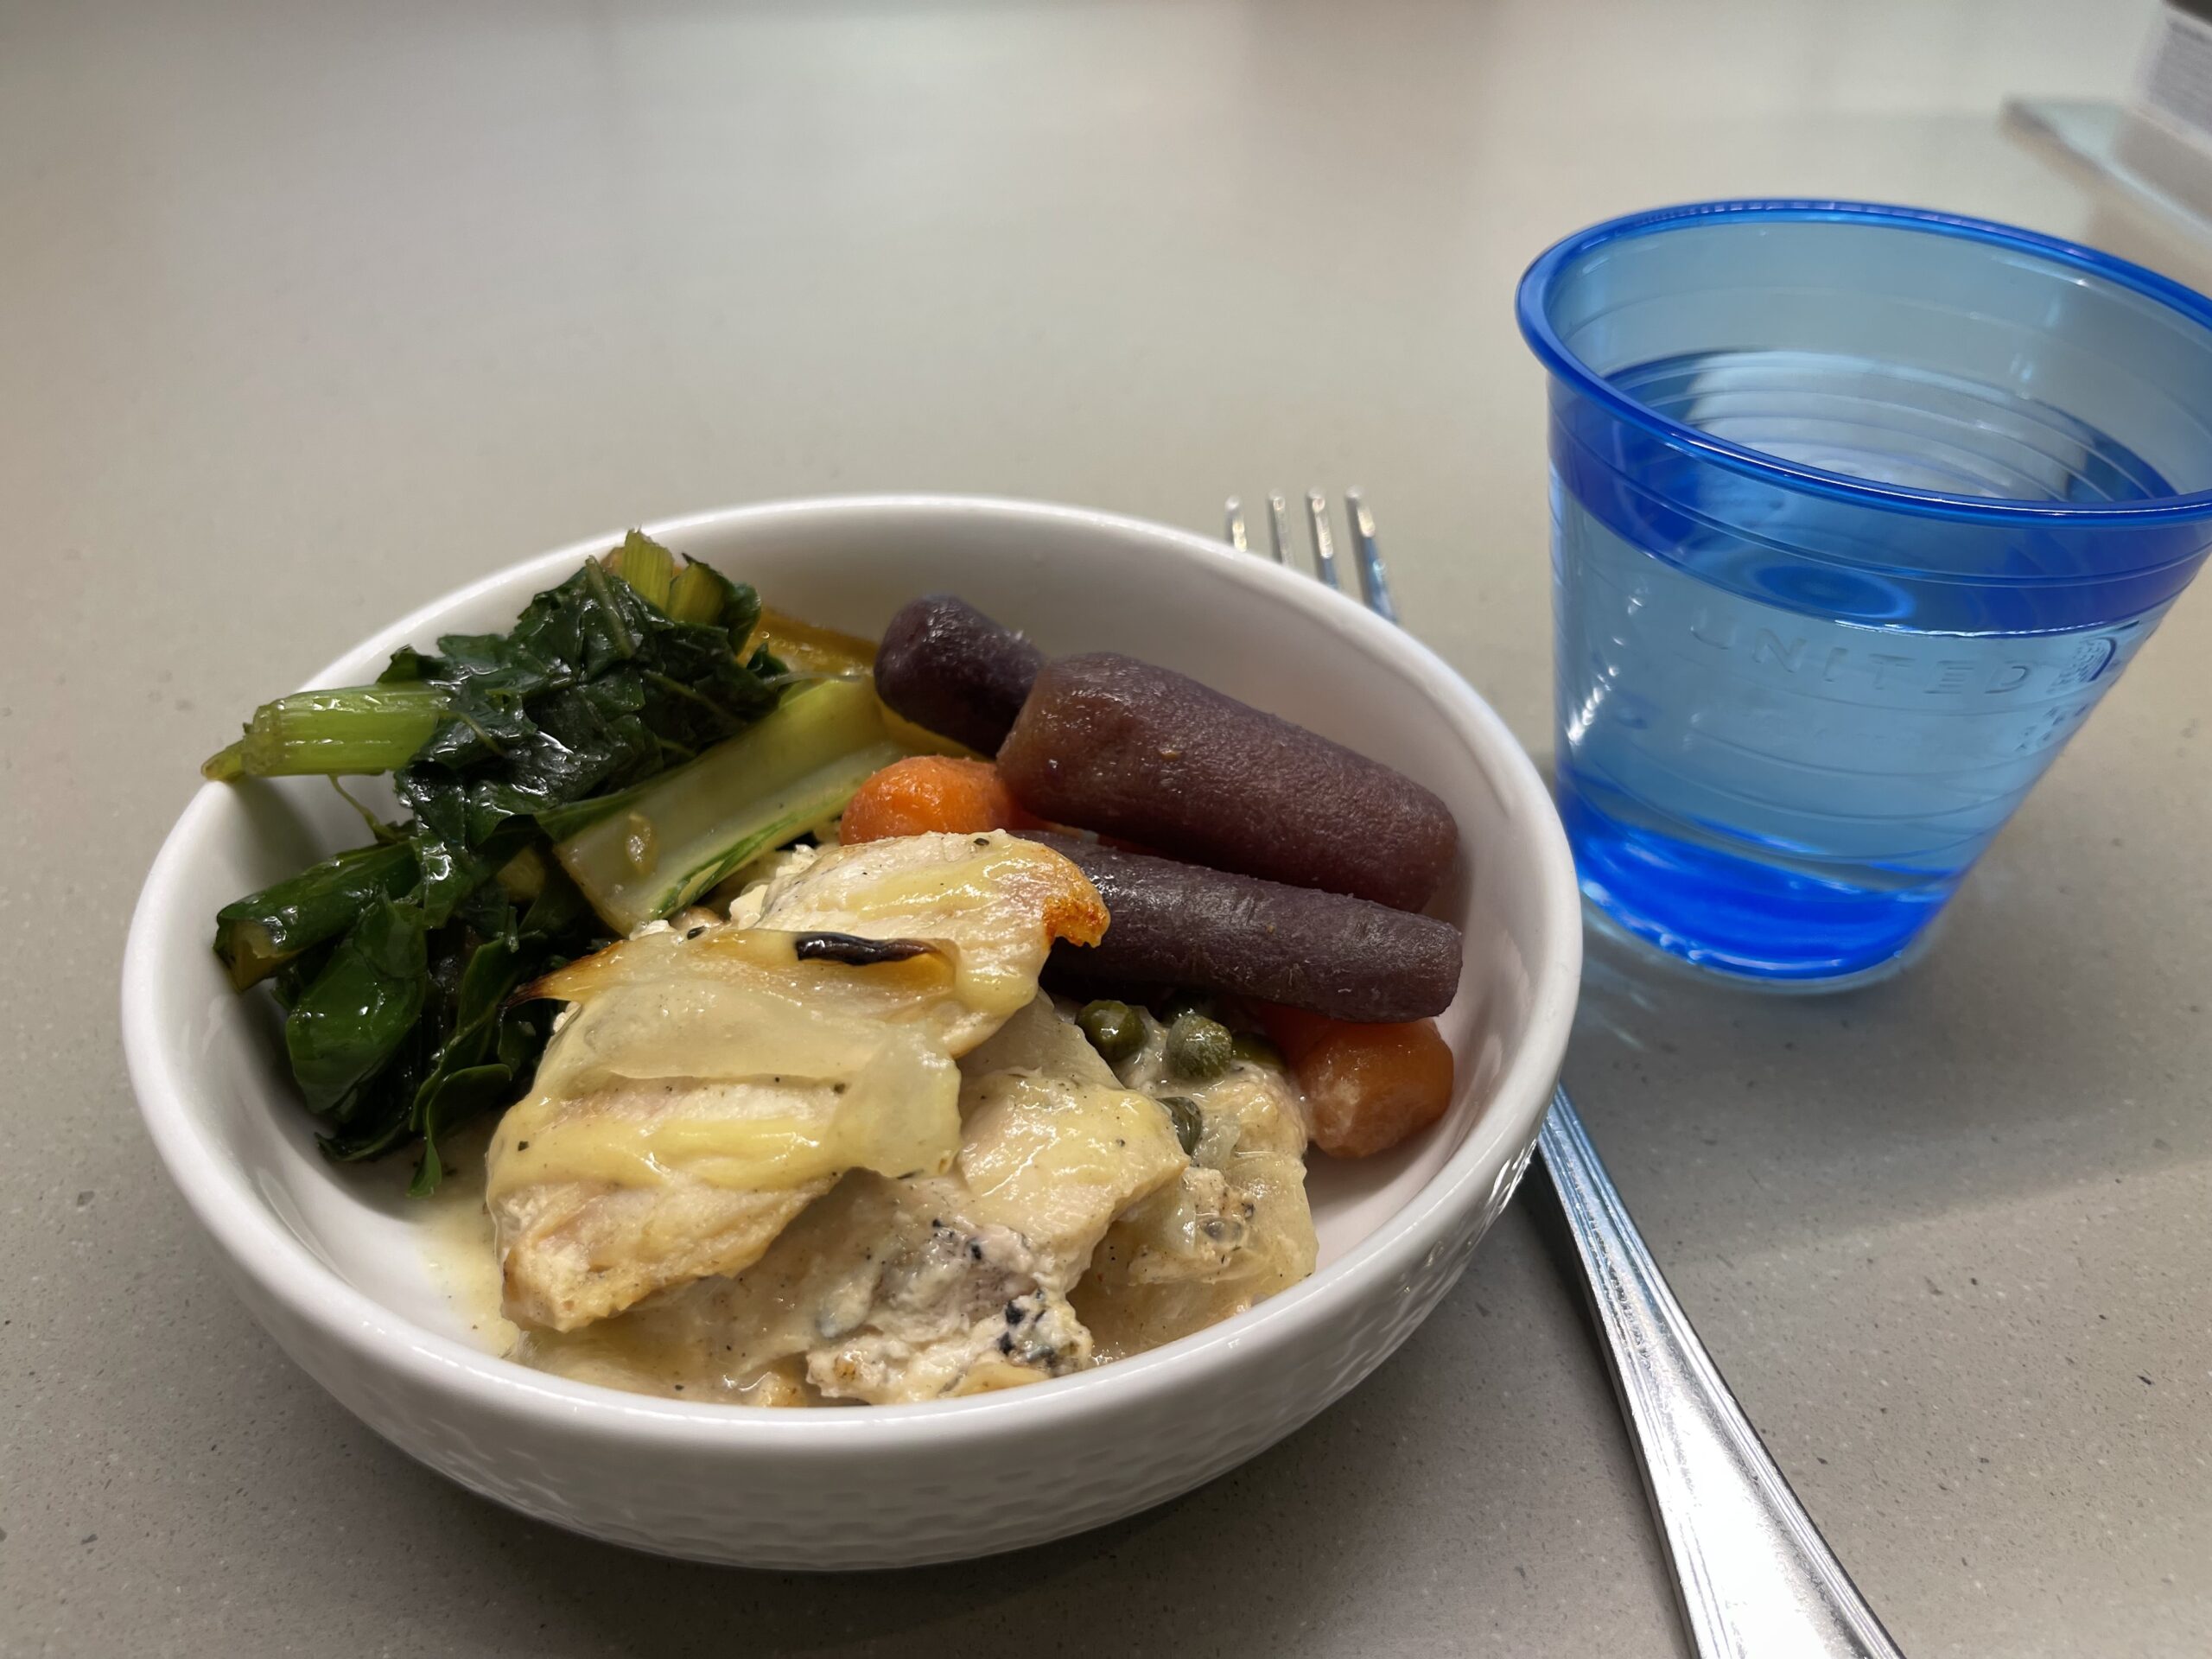 a bowl of food next to a glass of water